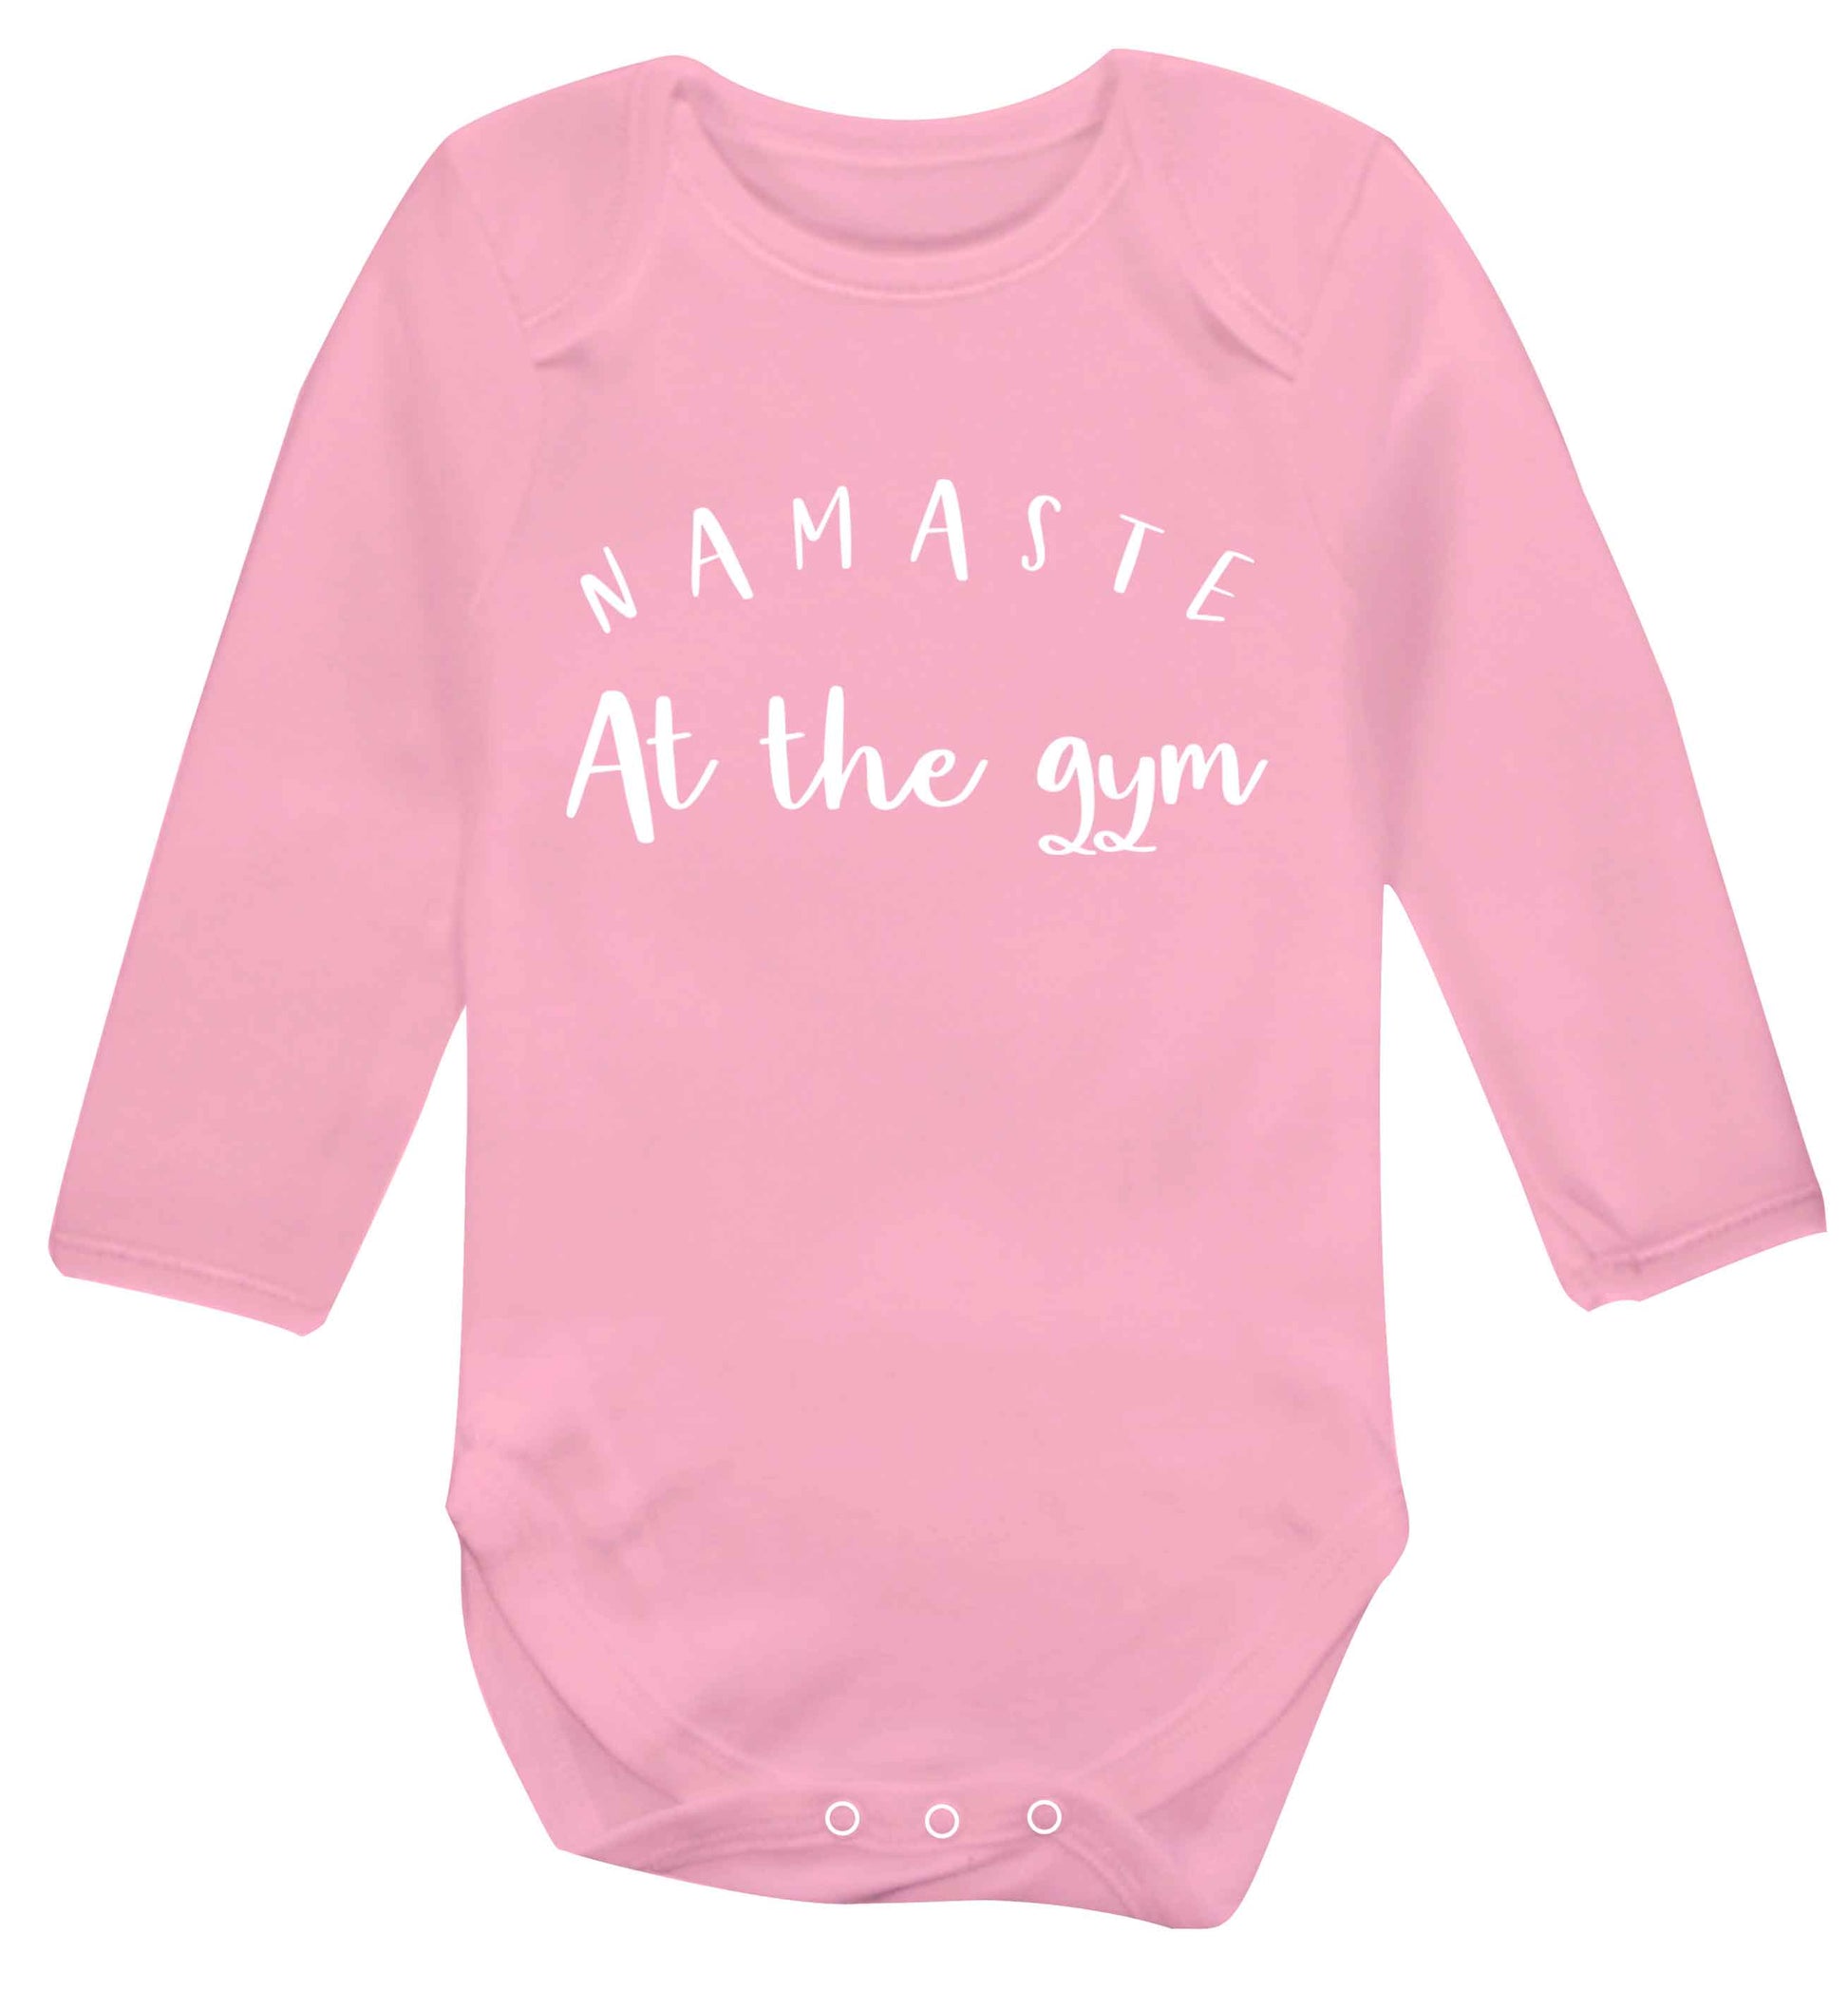 Namaste at the gym Baby Vest long sleeved pale pink 6-12 months